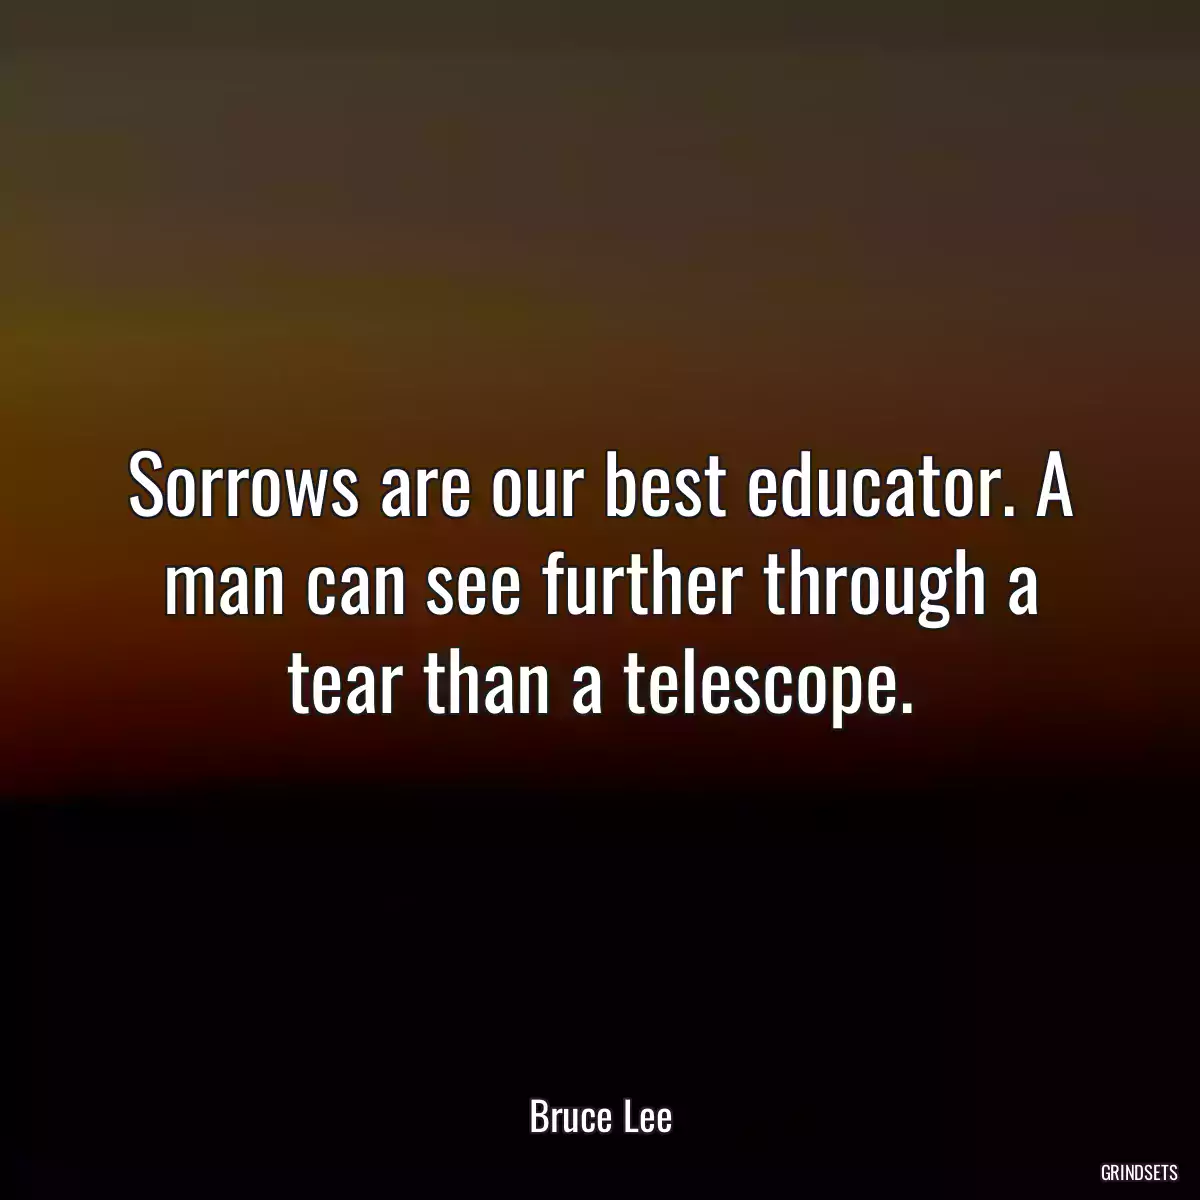 Sorrows are our best educator. A man can see further through a tear than a telescope.